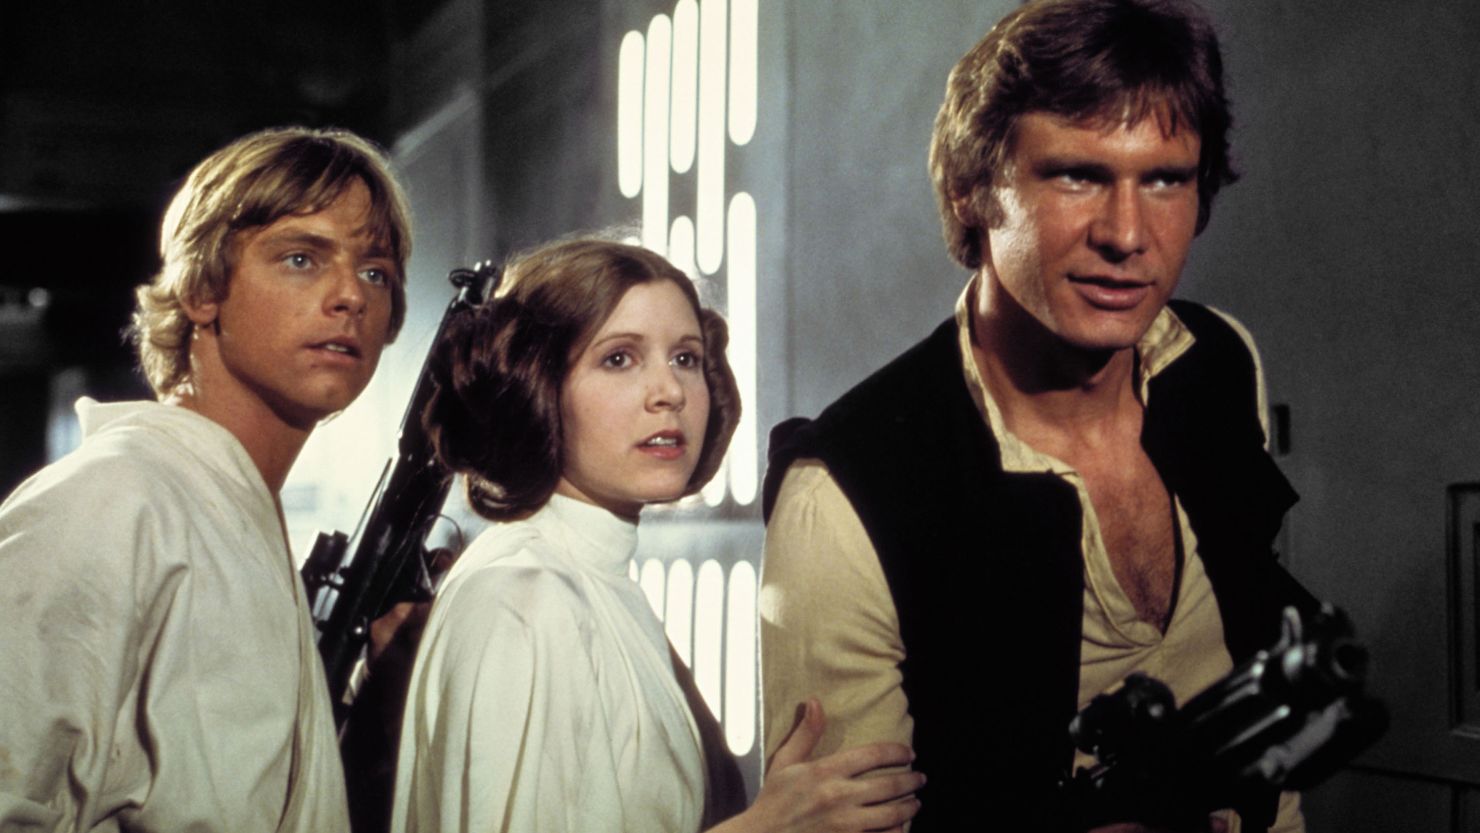 Mark Hamill, Carrie Fisher, Harrison Ford in "Star Wars Episode IV - A New Hope." 